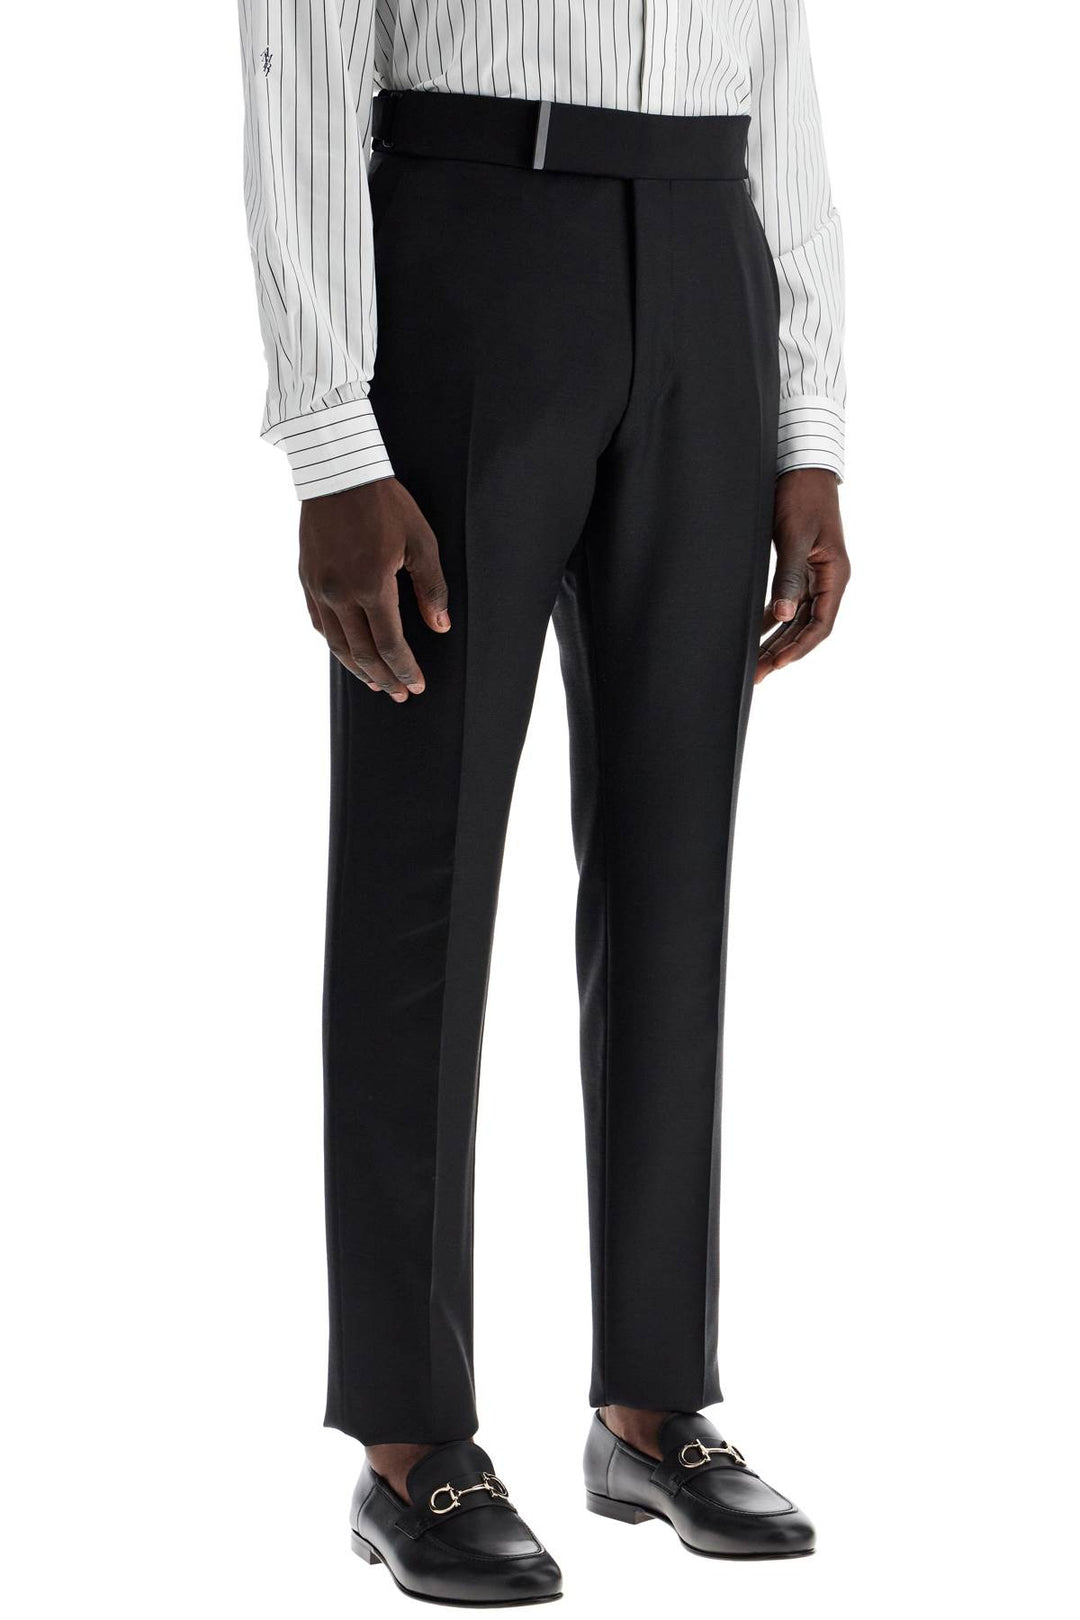 Tom Ford Tailored Wool And Mohair Trousers   Black